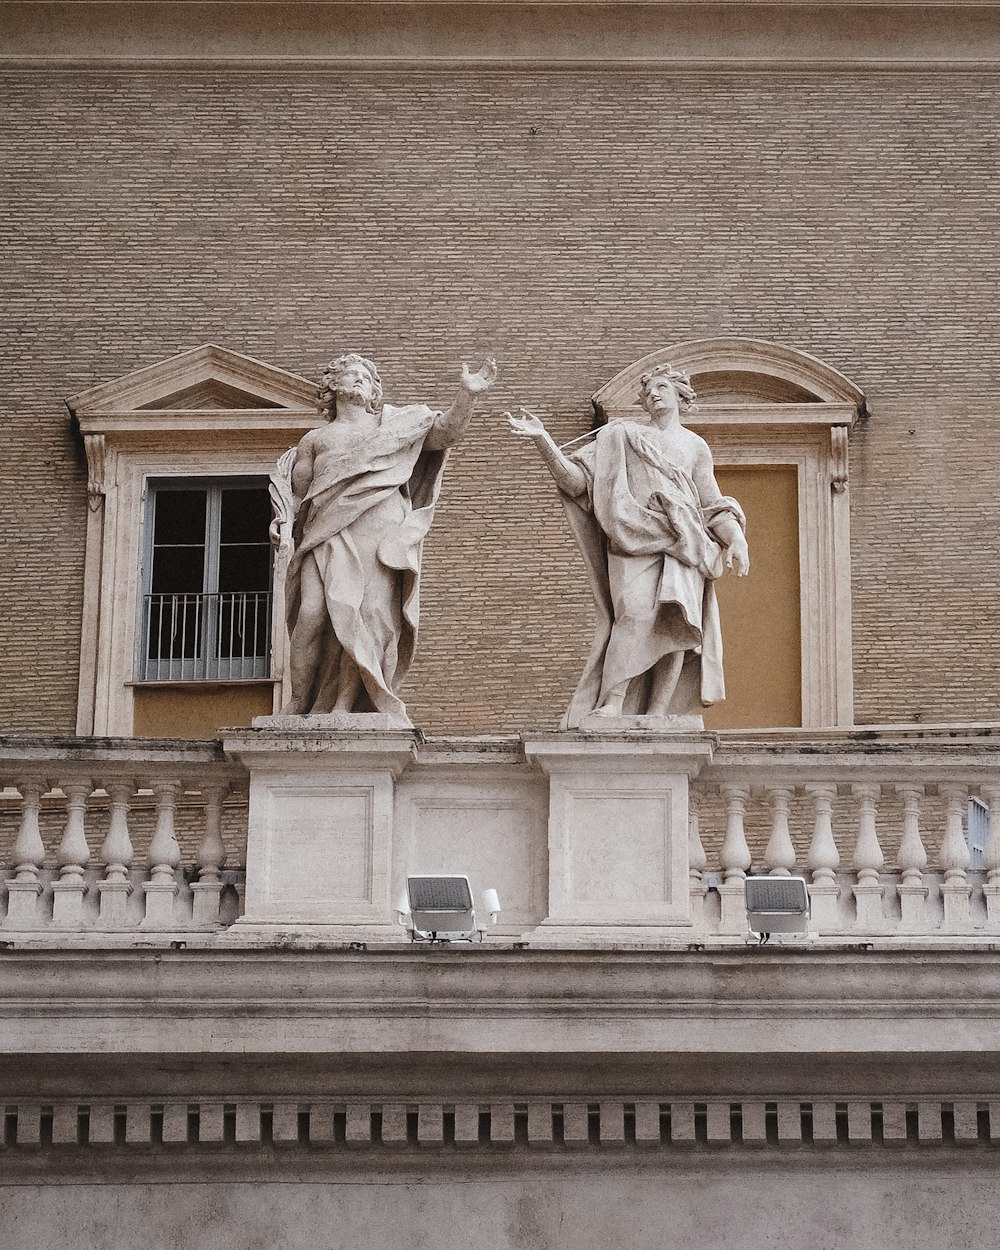 a statue of a man and a woman on a building